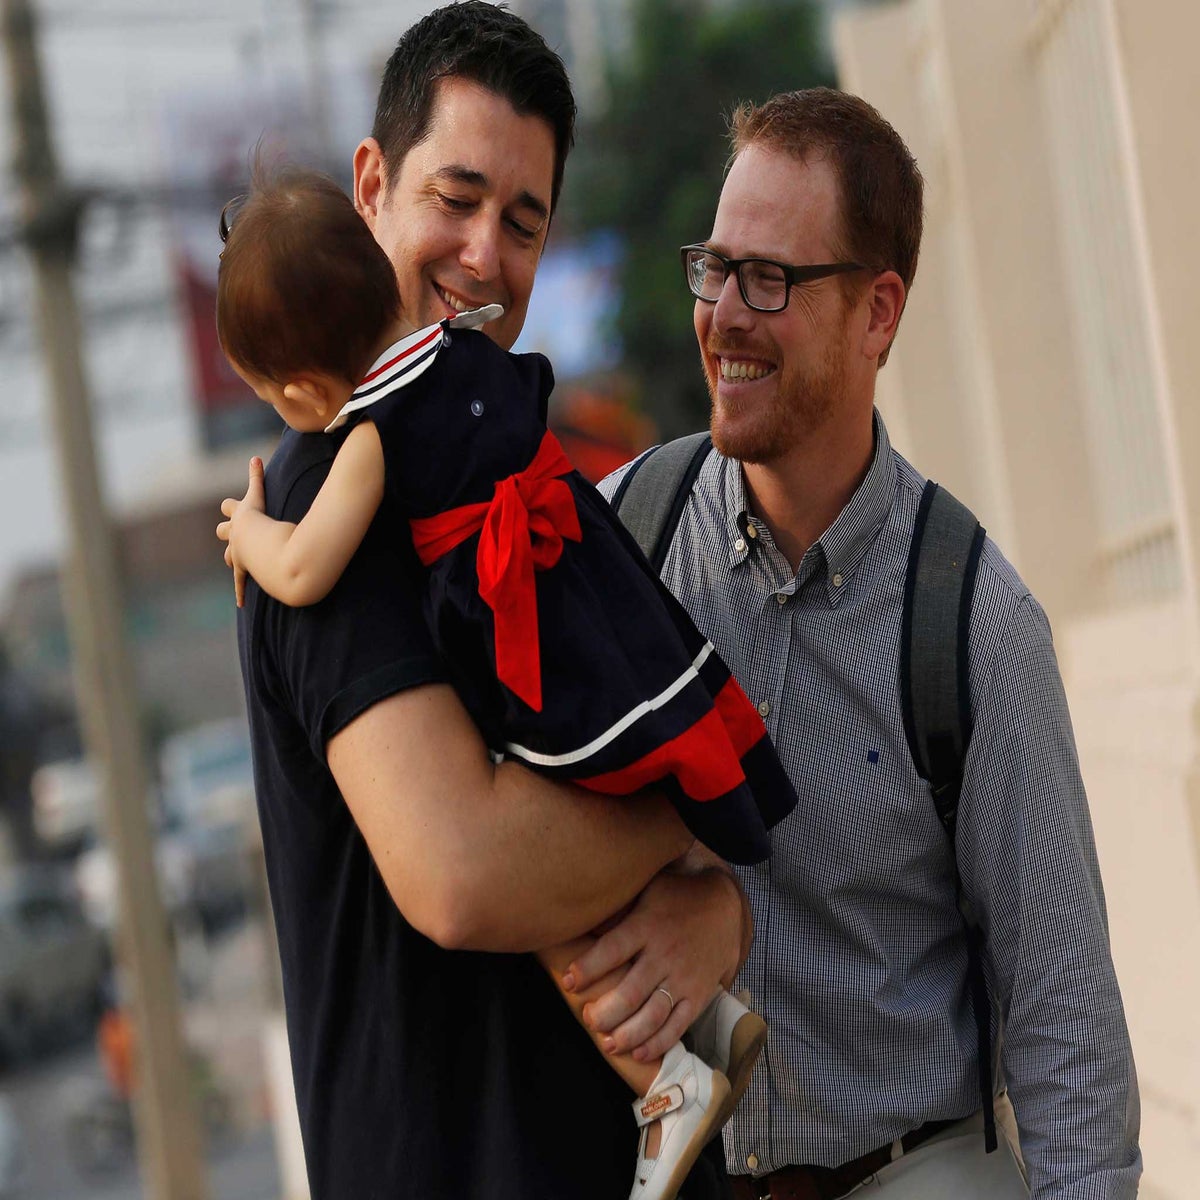 Gay couple sharing sweet moments with a surrogate mom. The young  fathers-to-be putting their